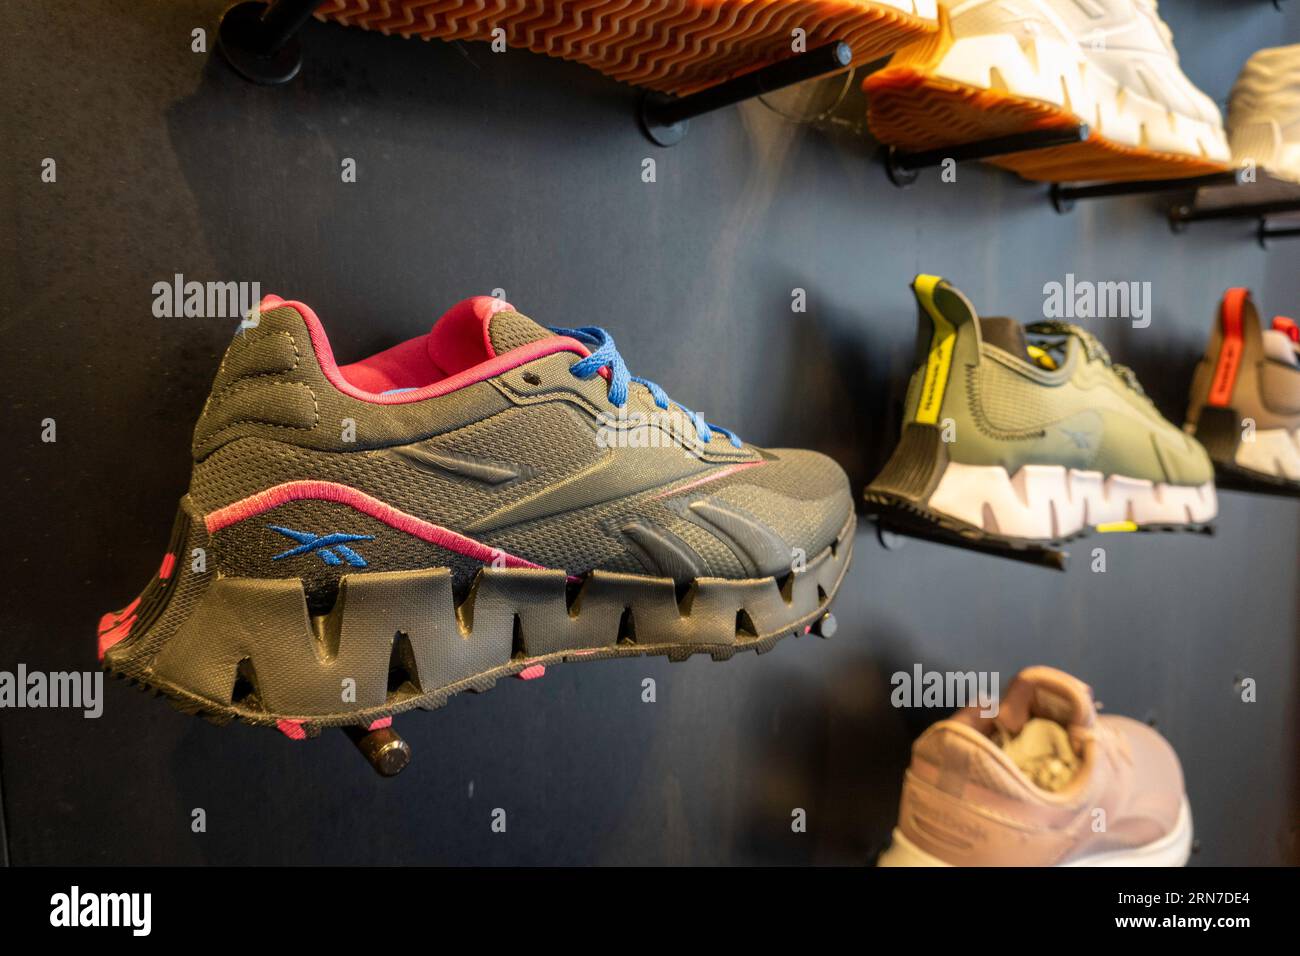 The Reebok brand athletic apparel and shoes has a large store on Union Square in Manhattan, 2023, New York City, USA Stock Photo